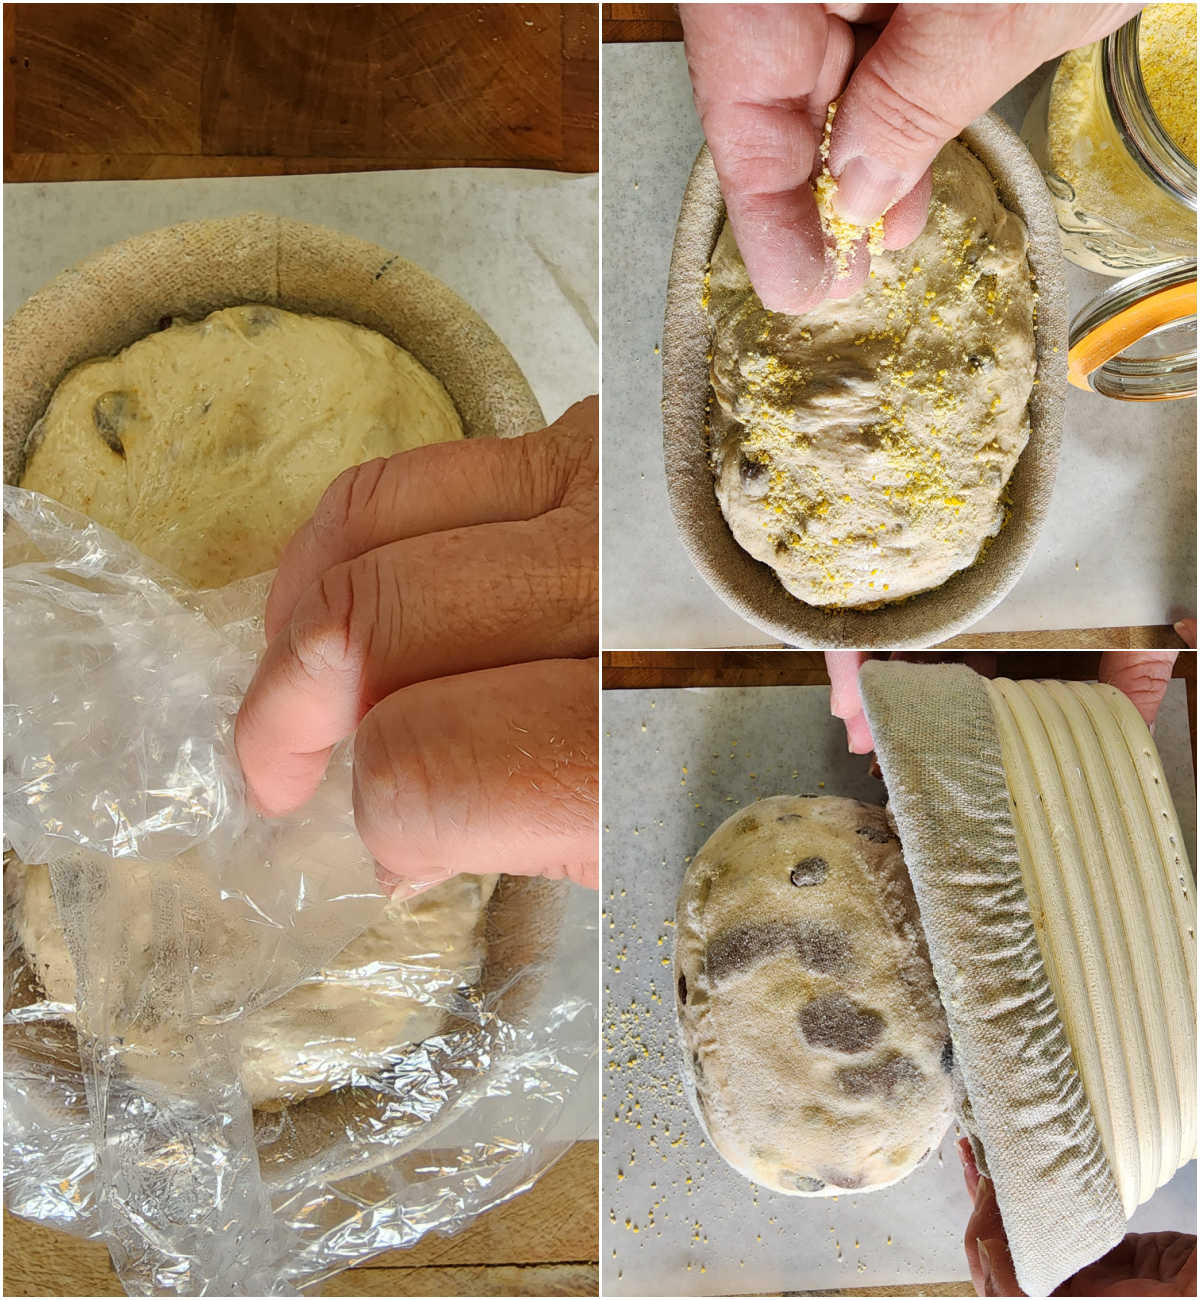 Step images of taking dough out of oval proofing basket.